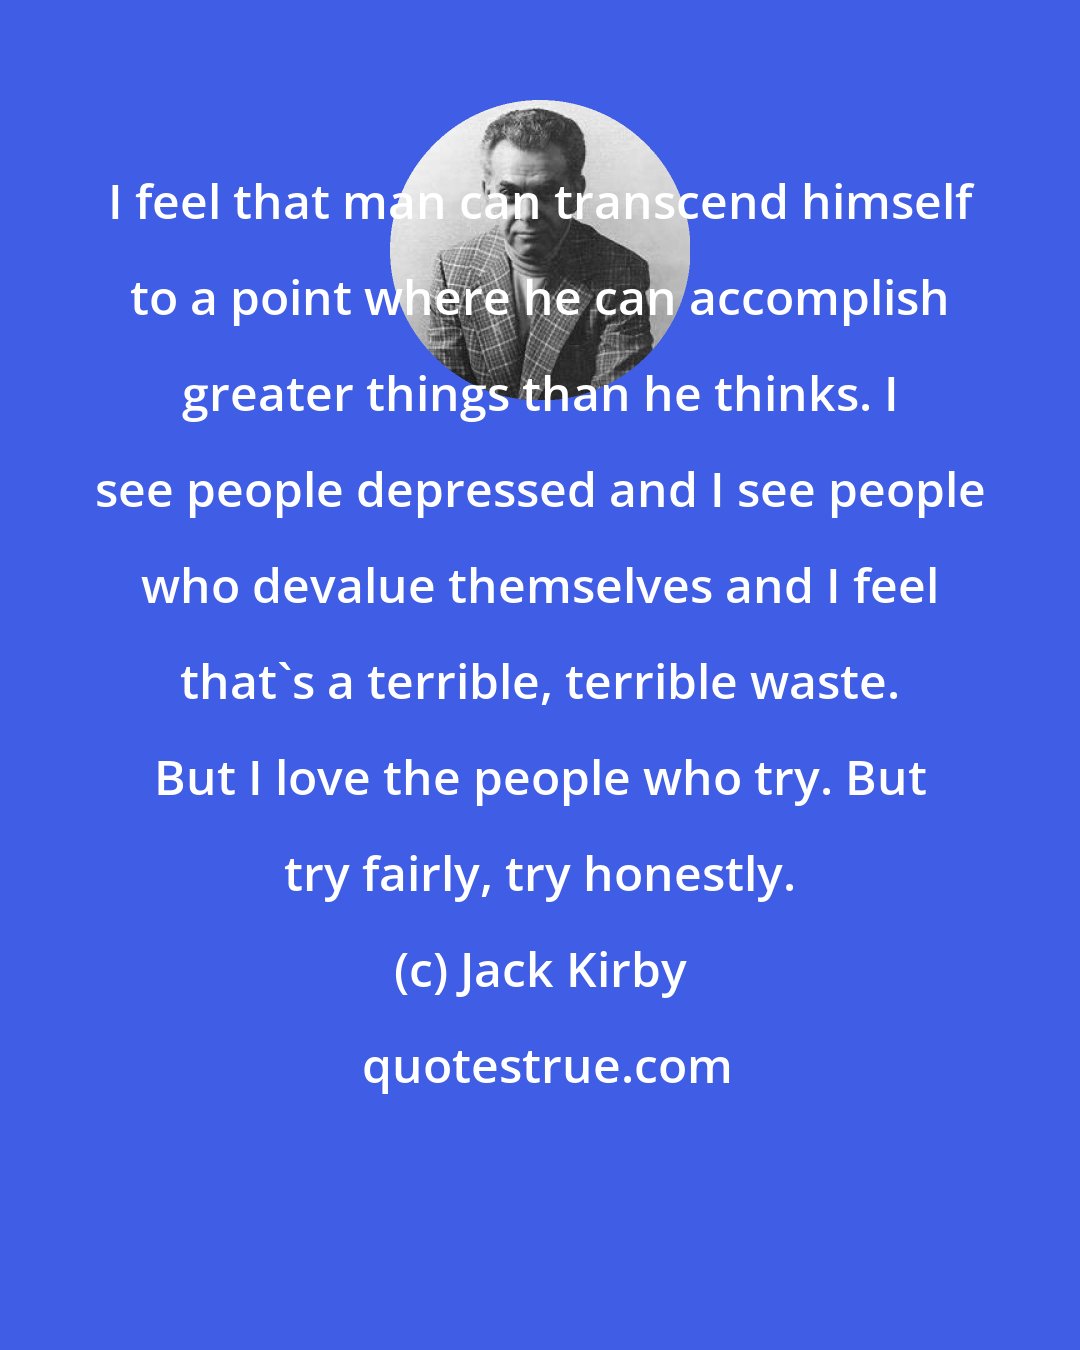 Jack Kirby: I feel that man can transcend himself to a point where he can accomplish greater things than he thinks. I see people depressed and I see people who devalue themselves and I feel that's a terrible, terrible waste. But I love the people who try. But try fairly, try honestly.